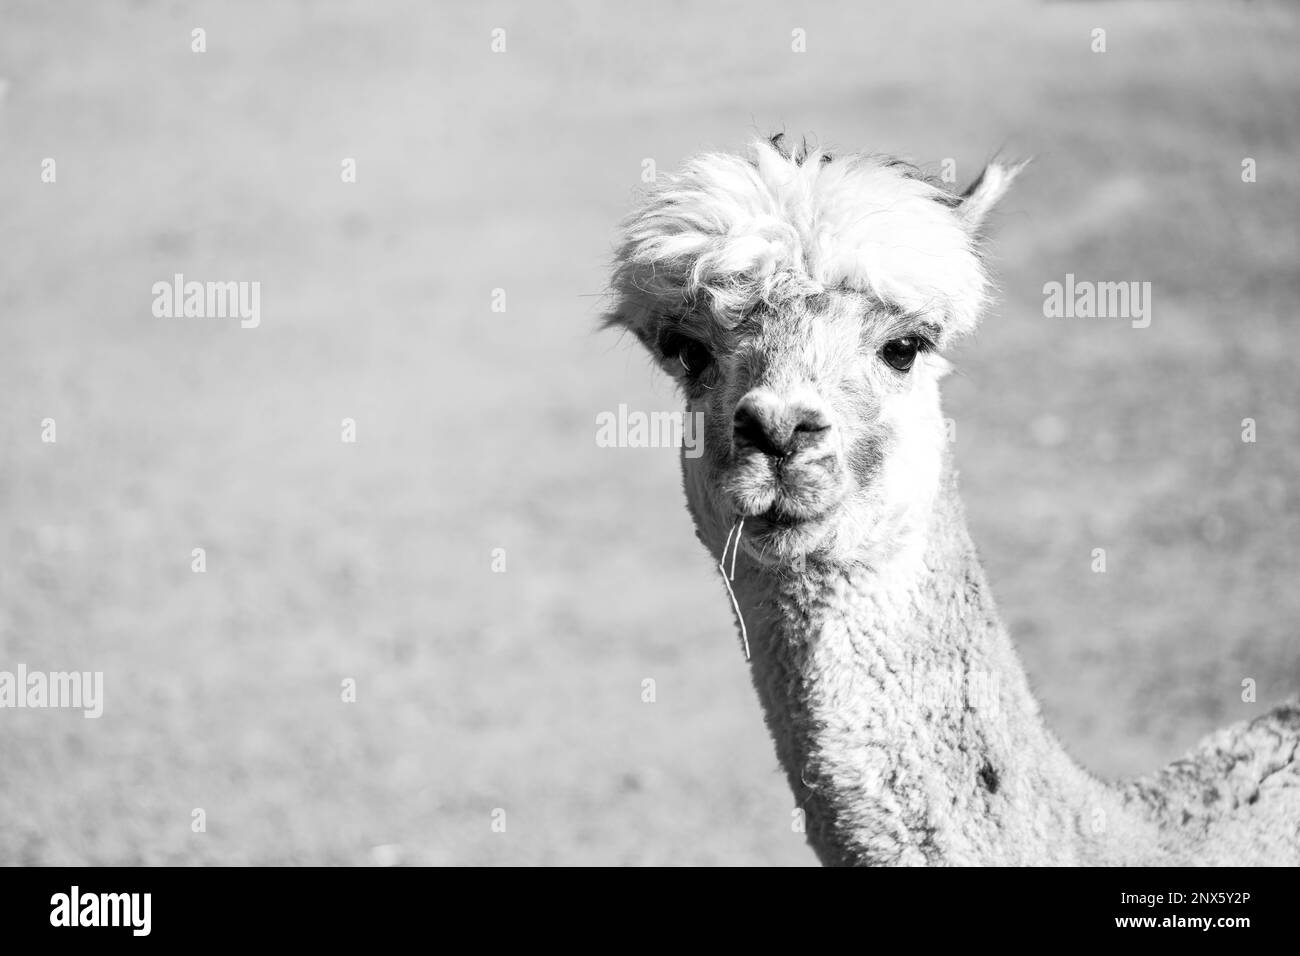 Portrait of an alpaca with a light colored fur. Animal close-up. Vicugna pacos. Stock Photo